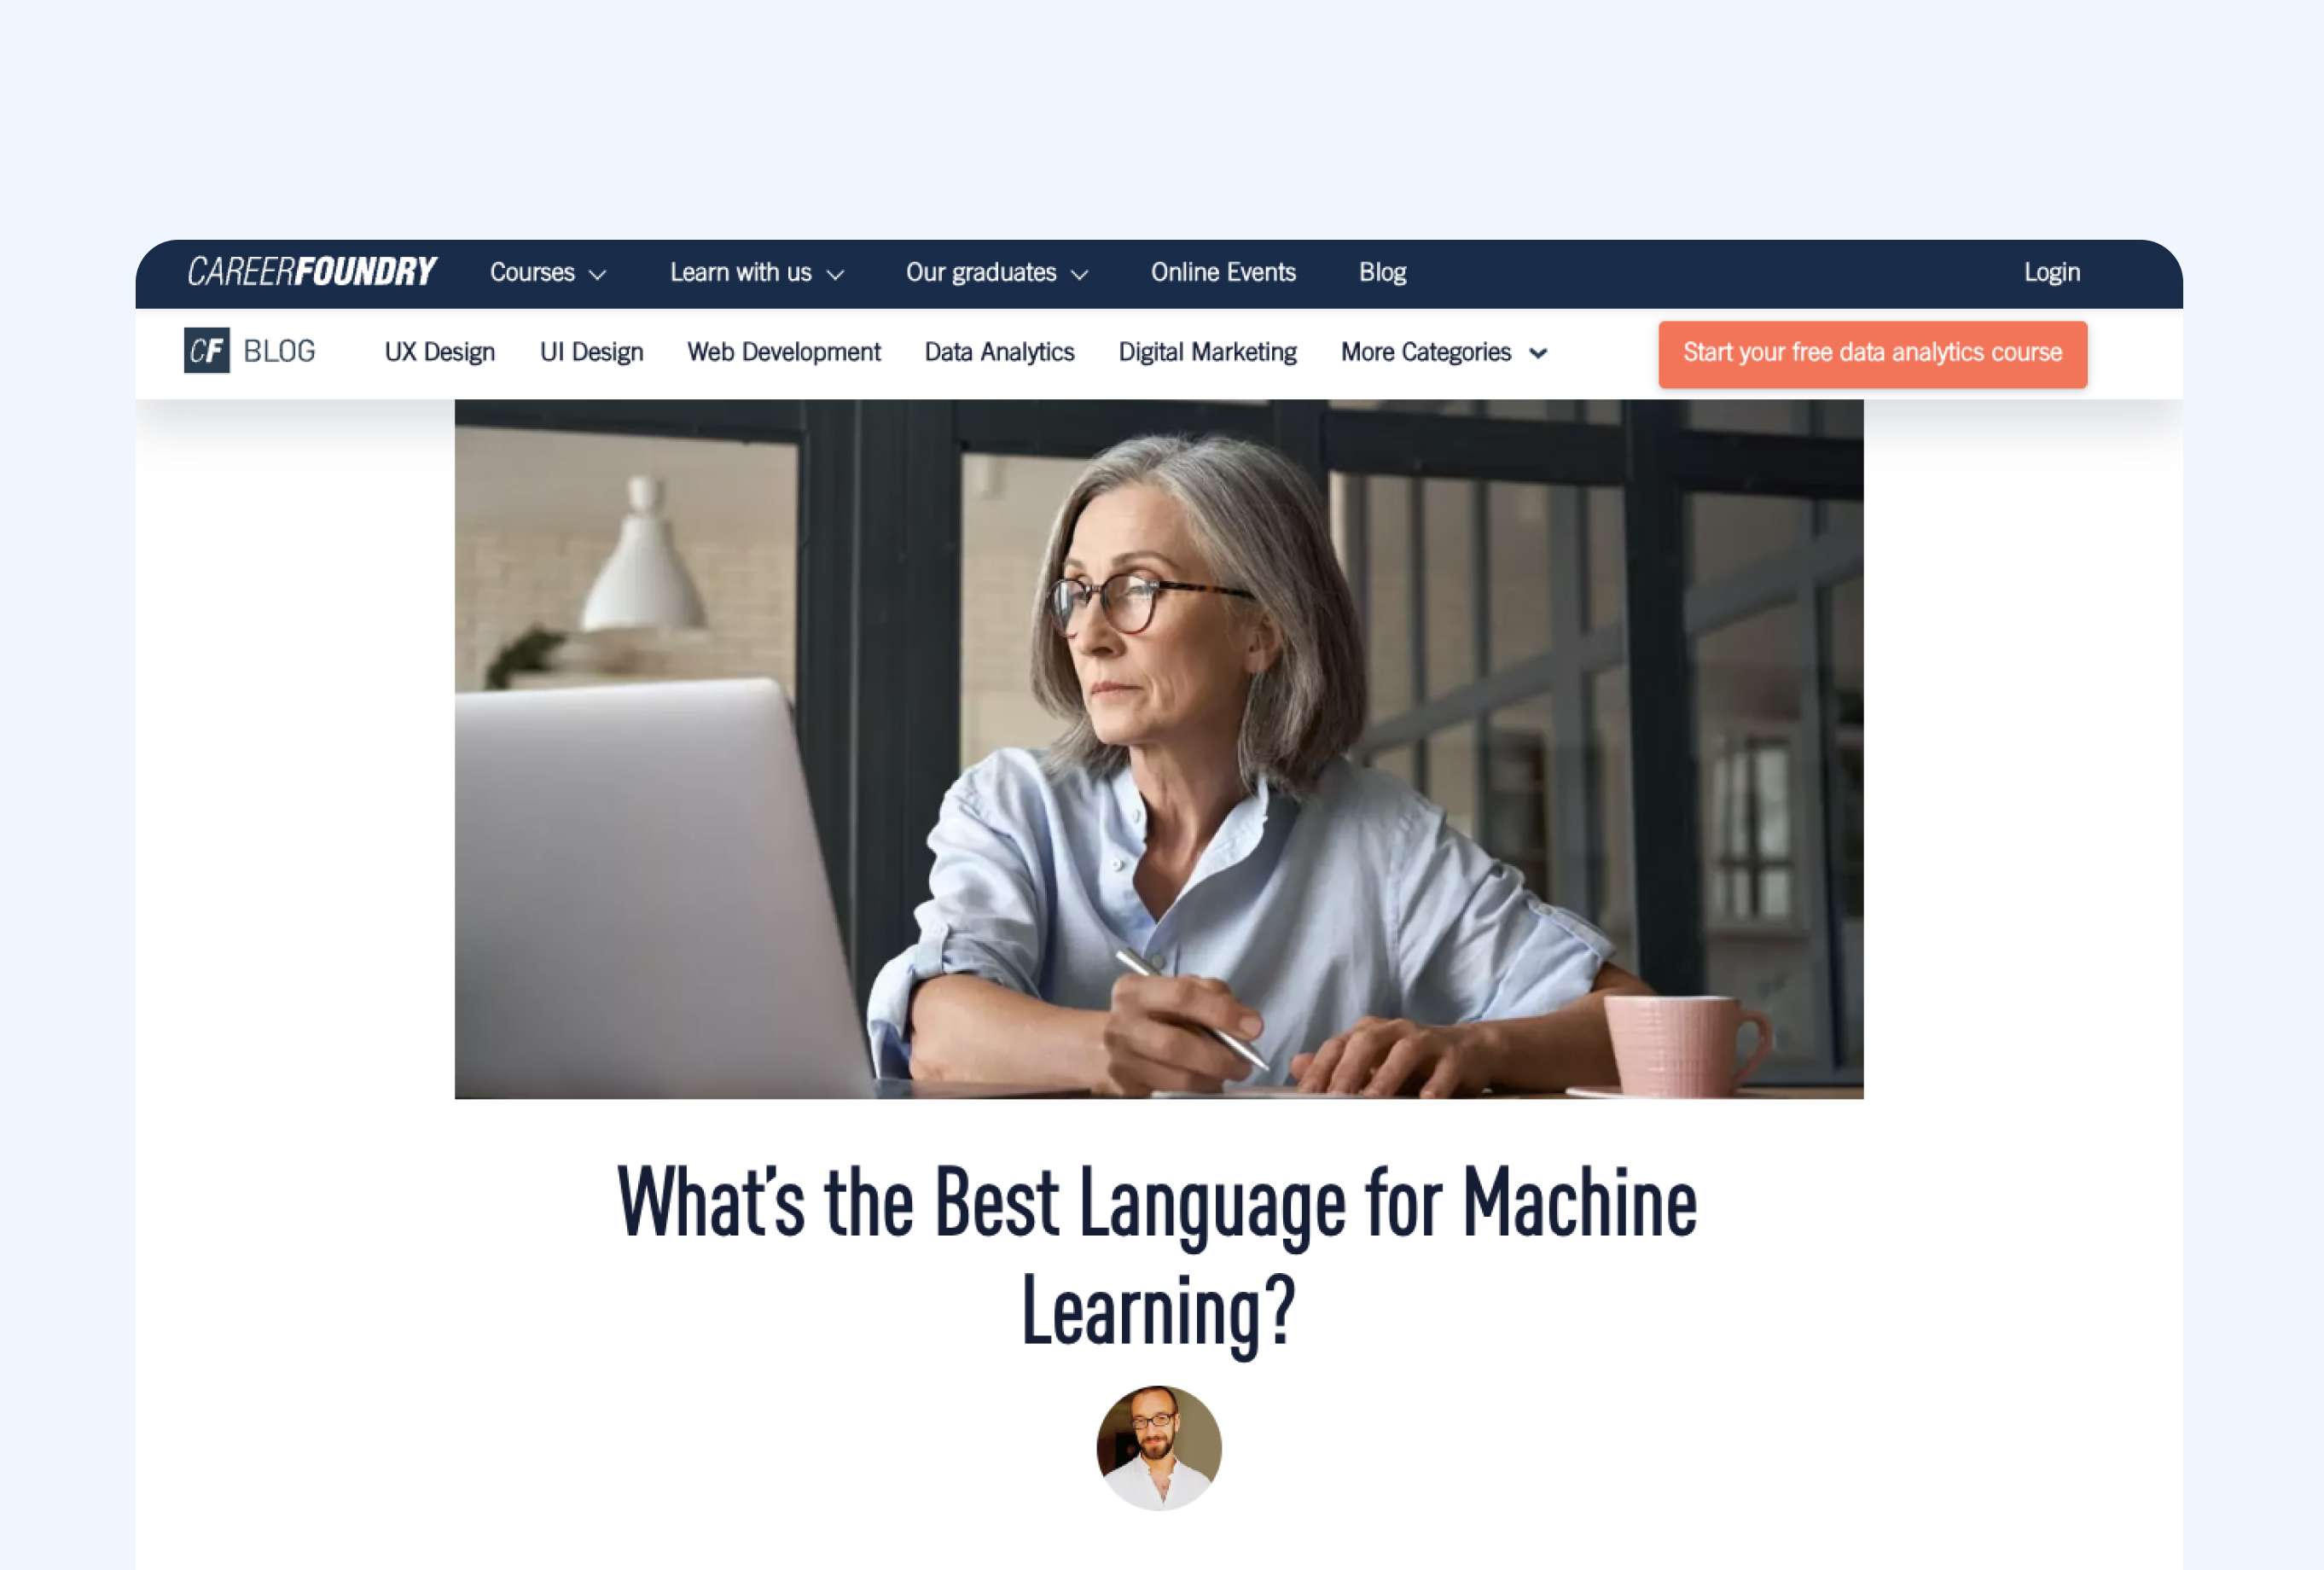 What's The Best Language for Machine Learning?